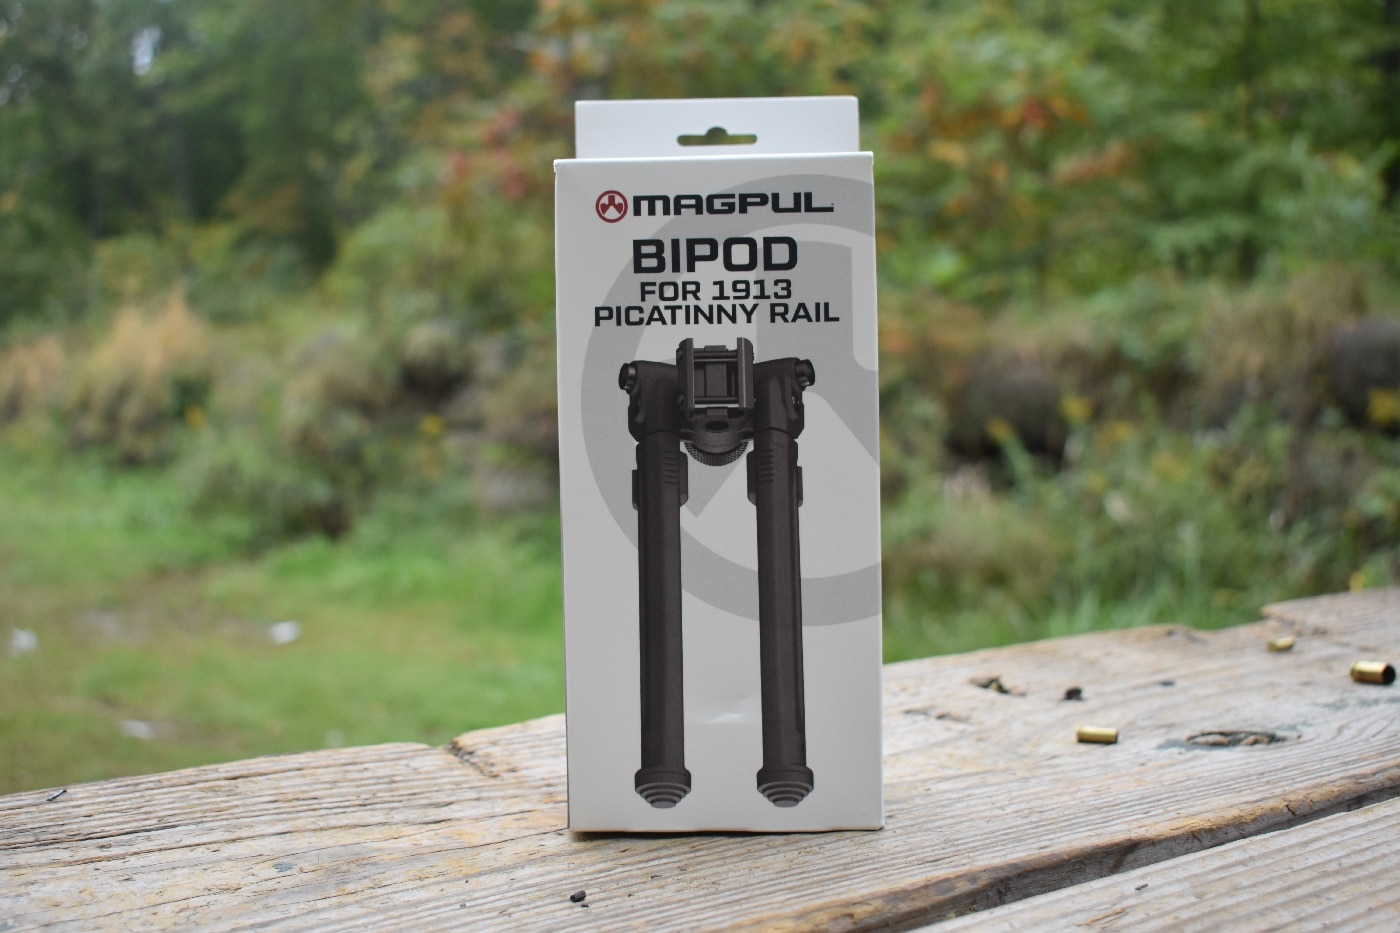 In this photo, we see the manufacturer's packaging for the Magpul bipod for Picatinny rail. It works with many rifles including SAINT and other ar-15 rifles.